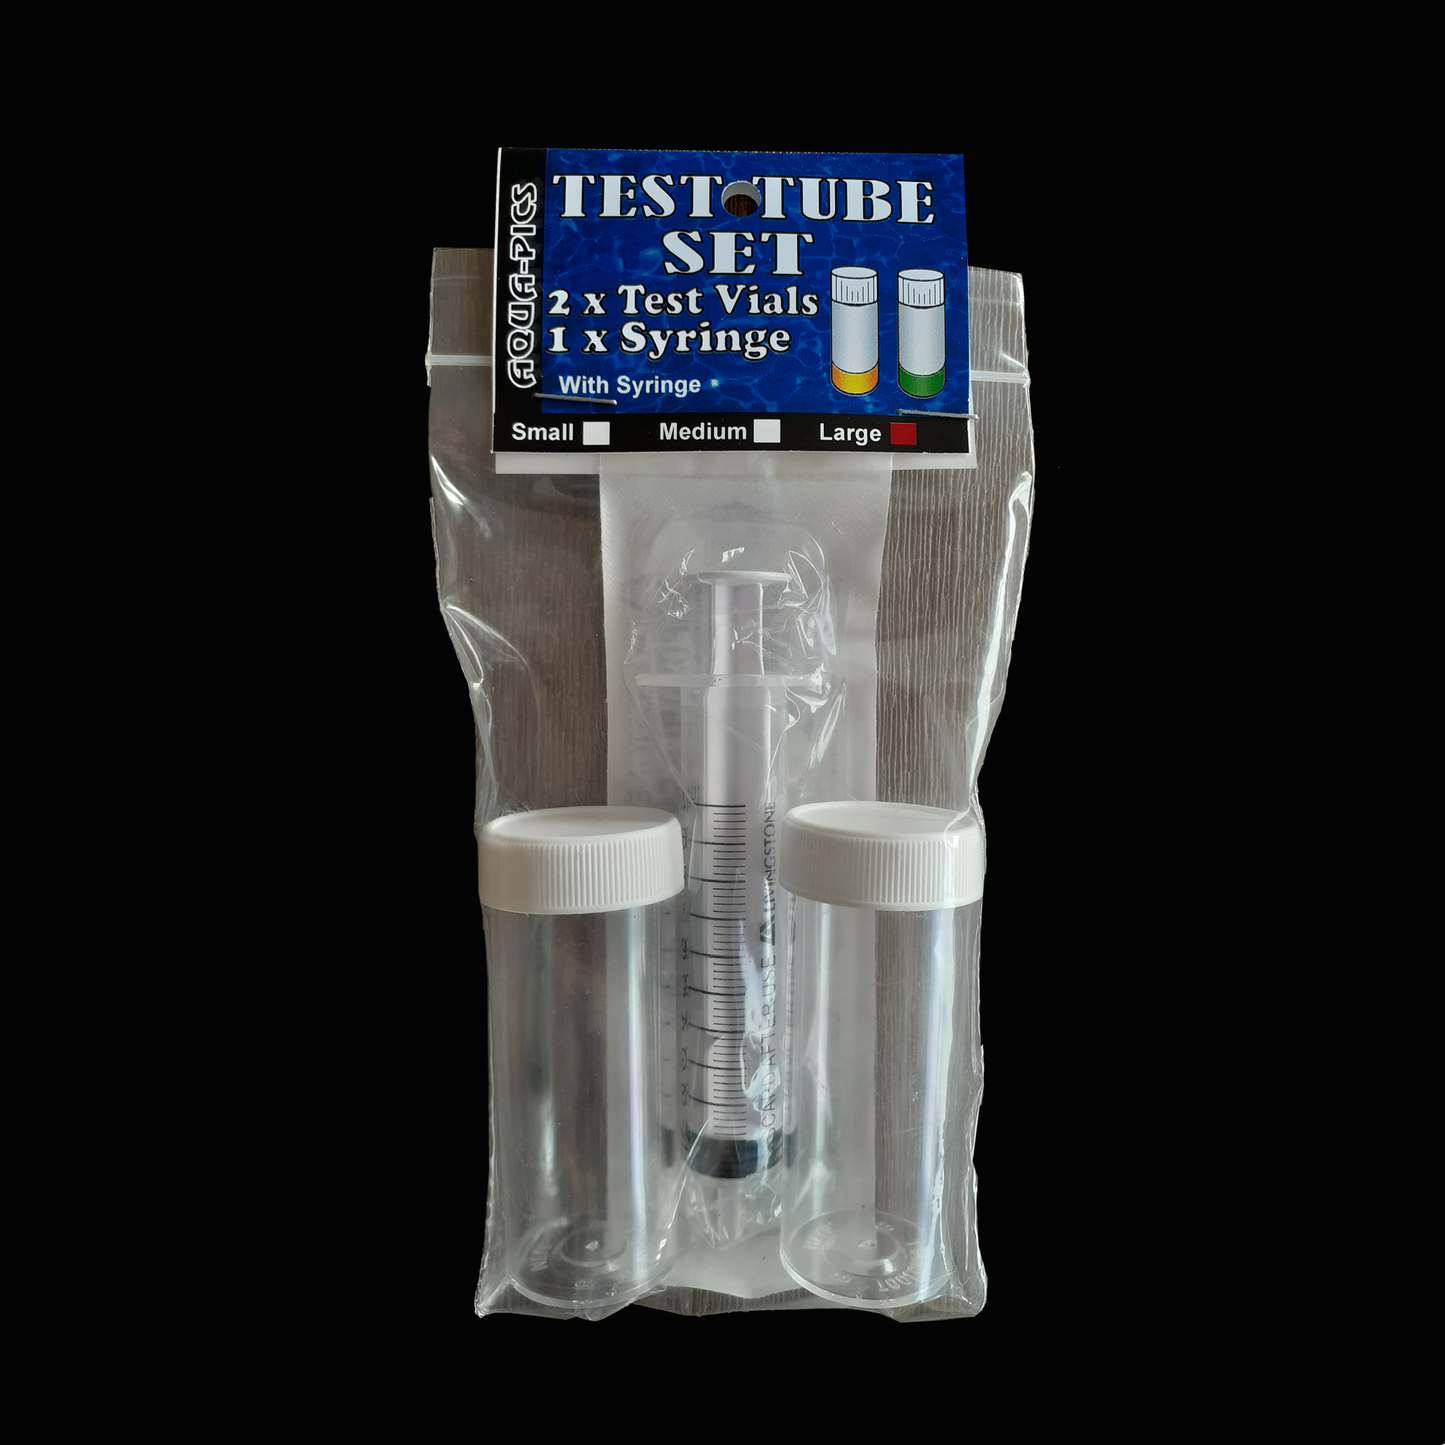 Test Tube Set for accurate tank water testing